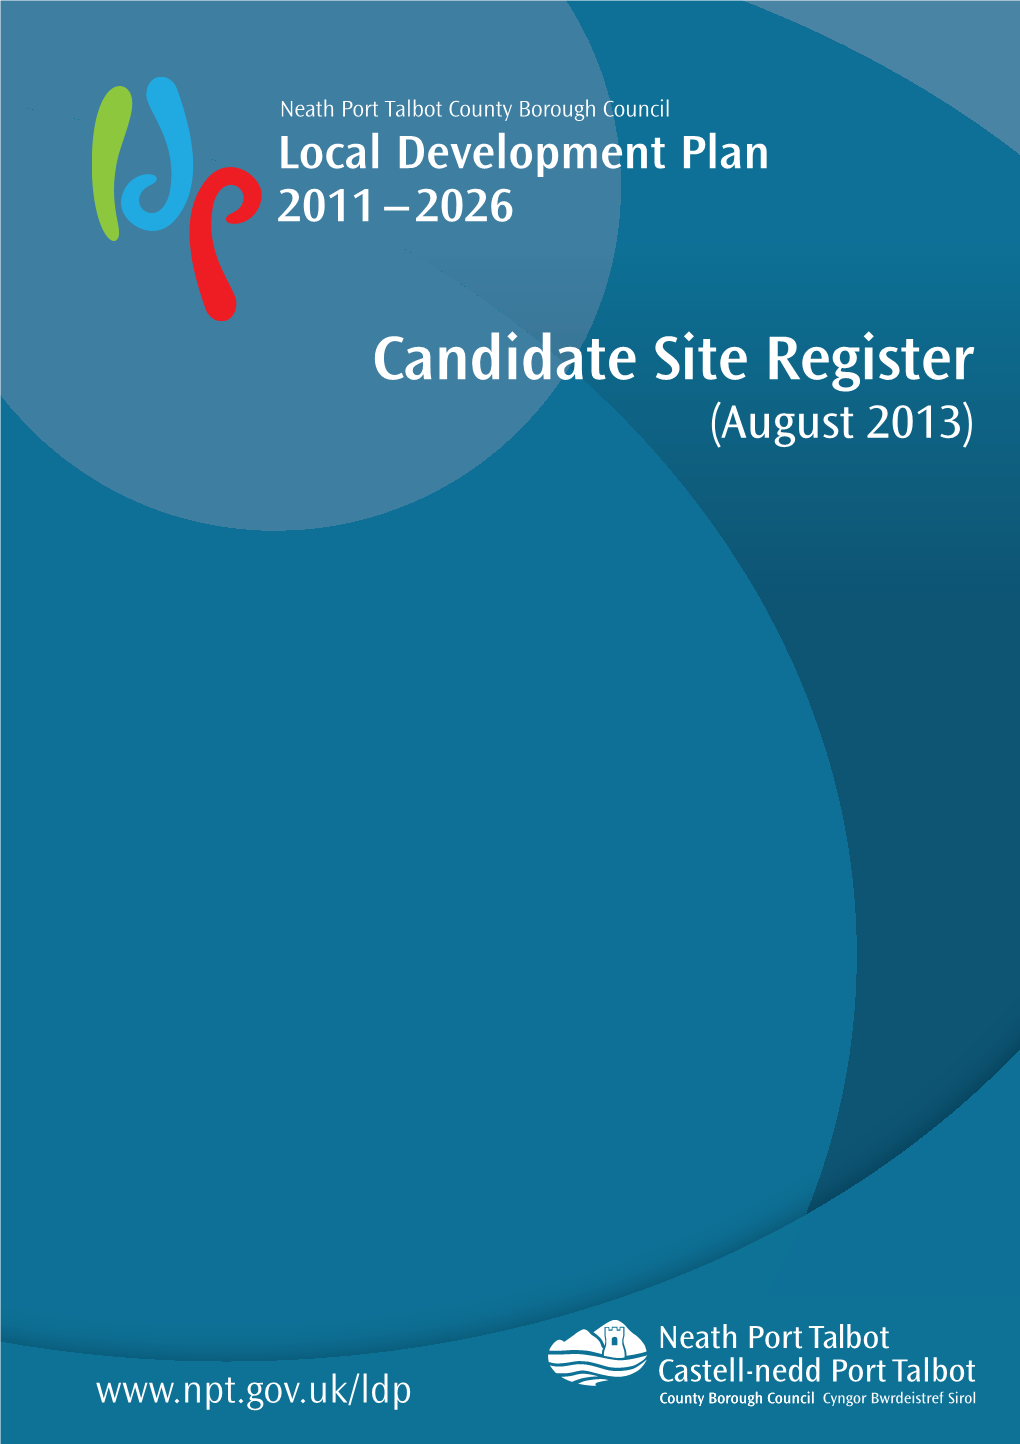 Candidate Site Register (August 2013)